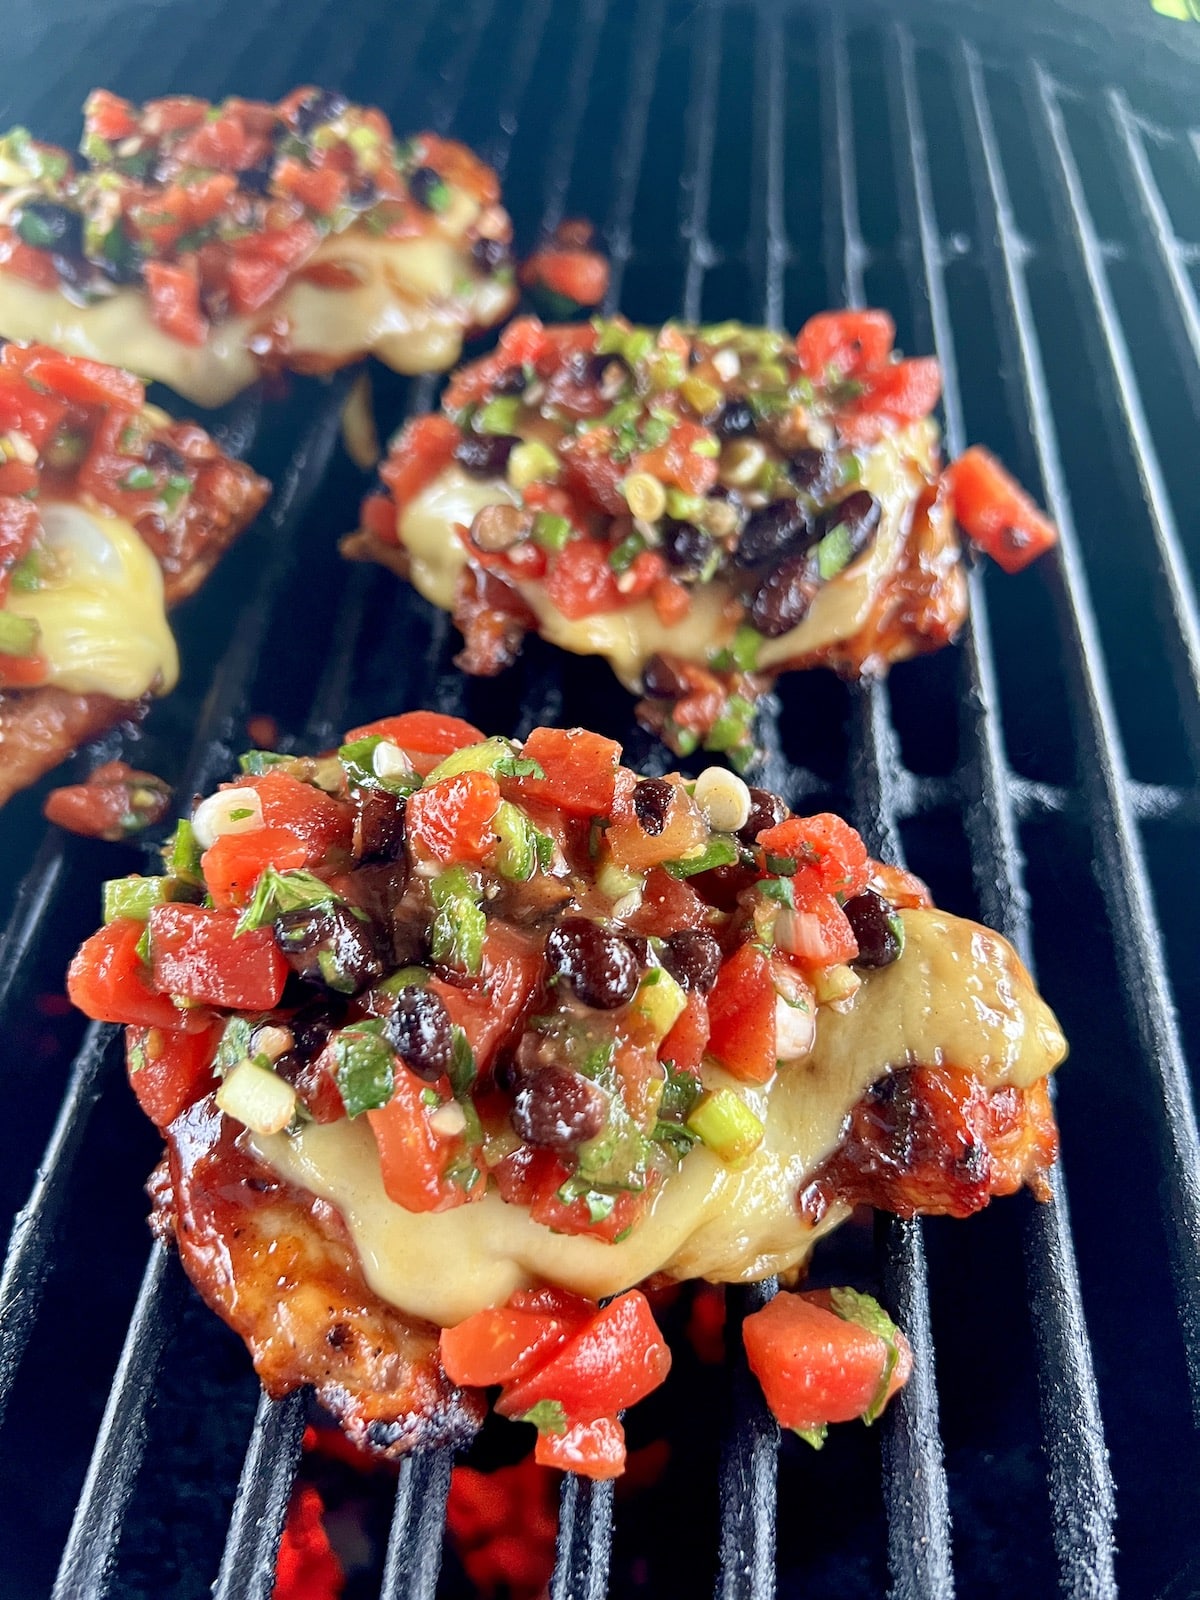 Grilling chicken with cheese and salsa.